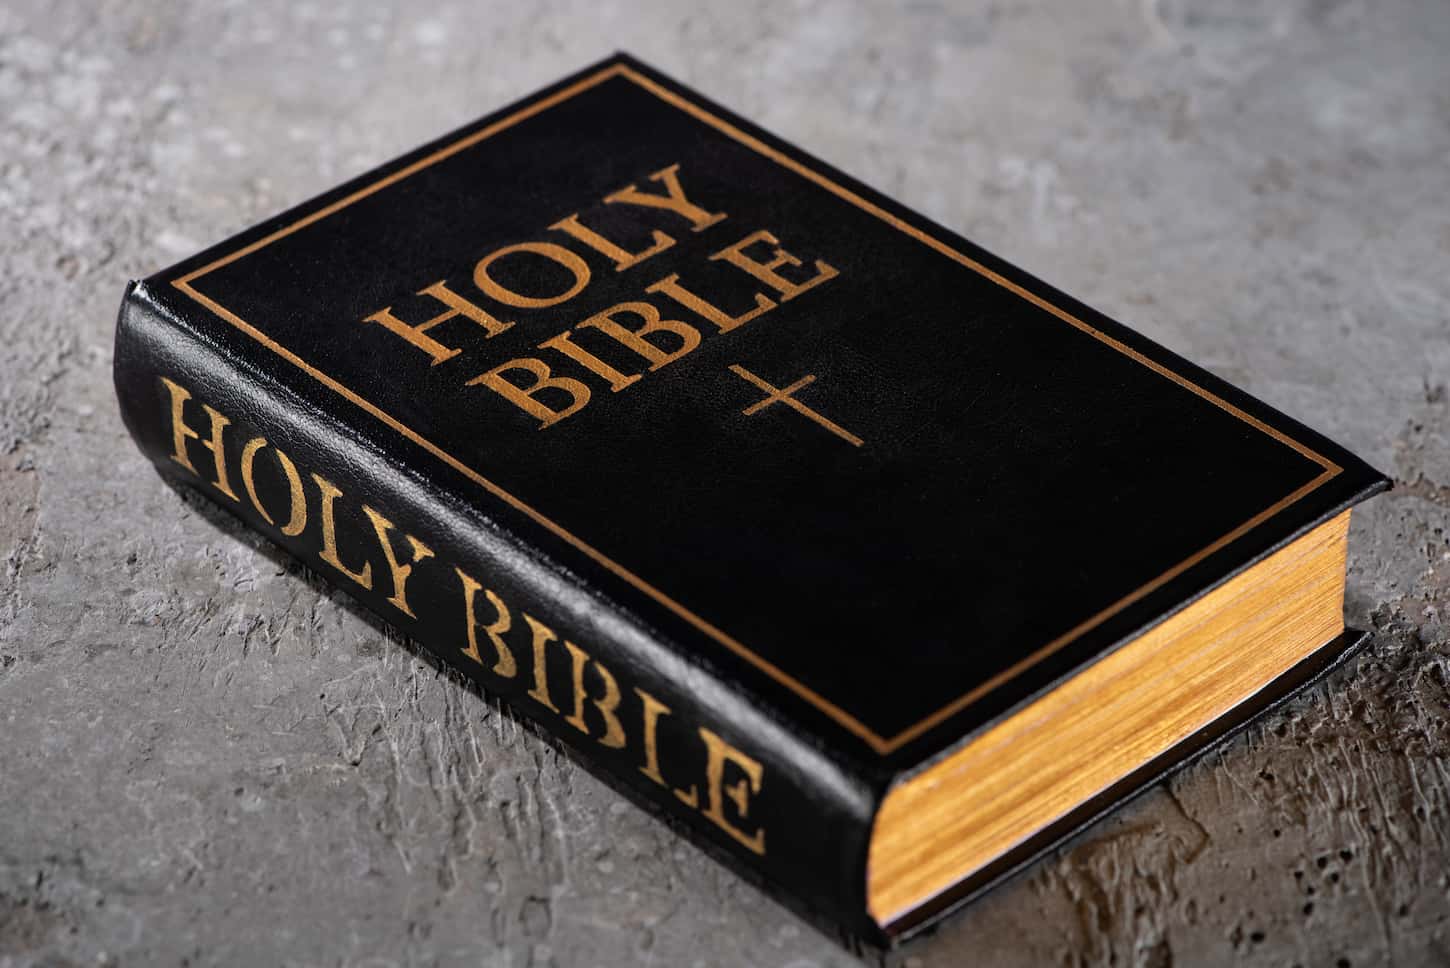 An image of a holy bible on a grey textured surface.